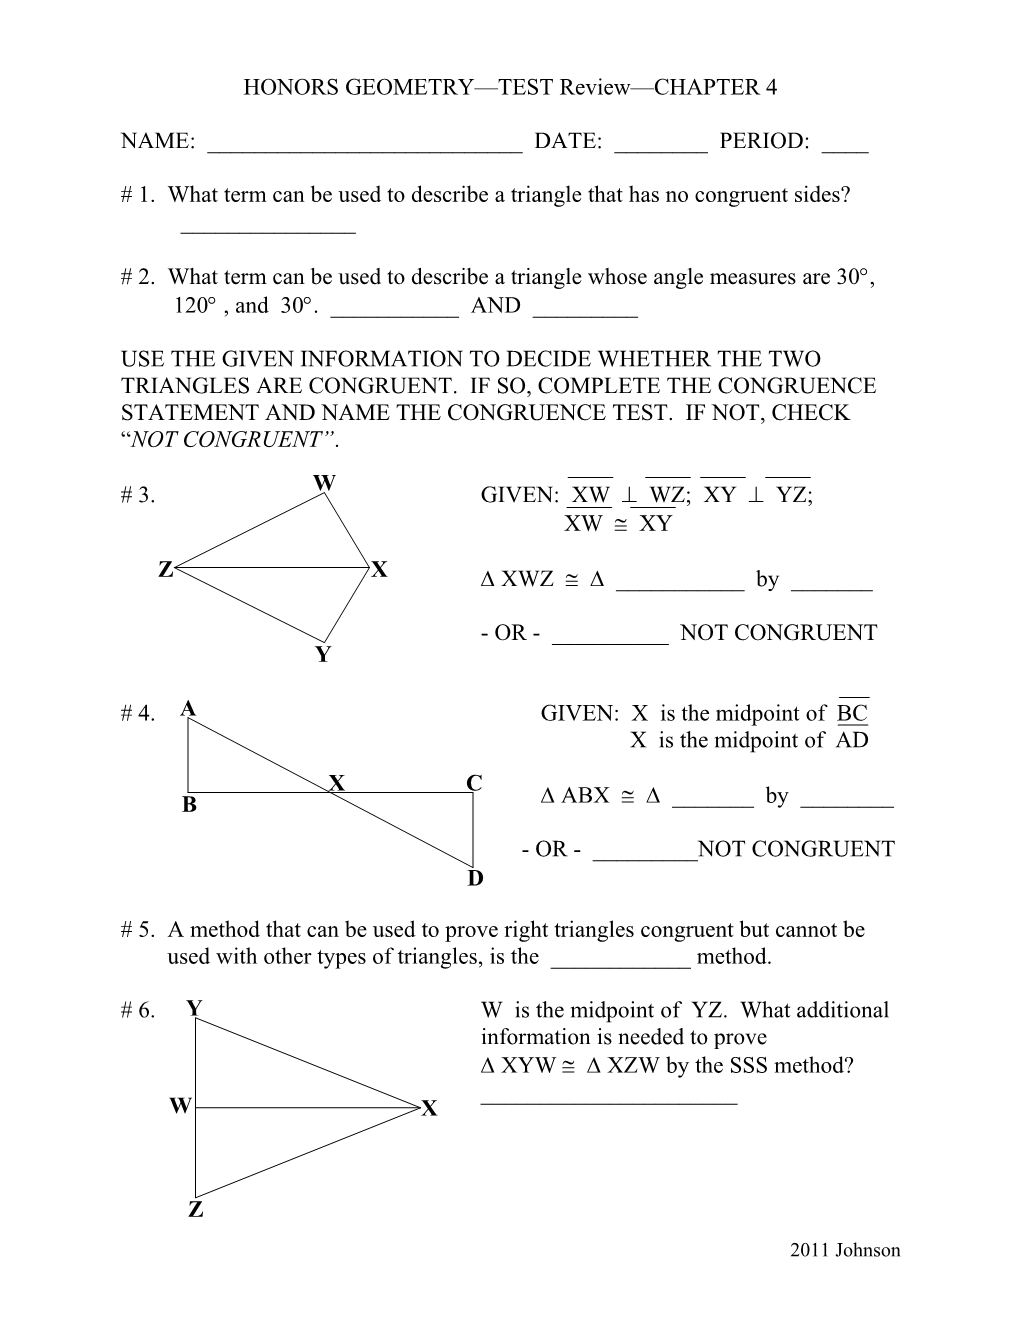 Honors Geometry Test Chapter 4